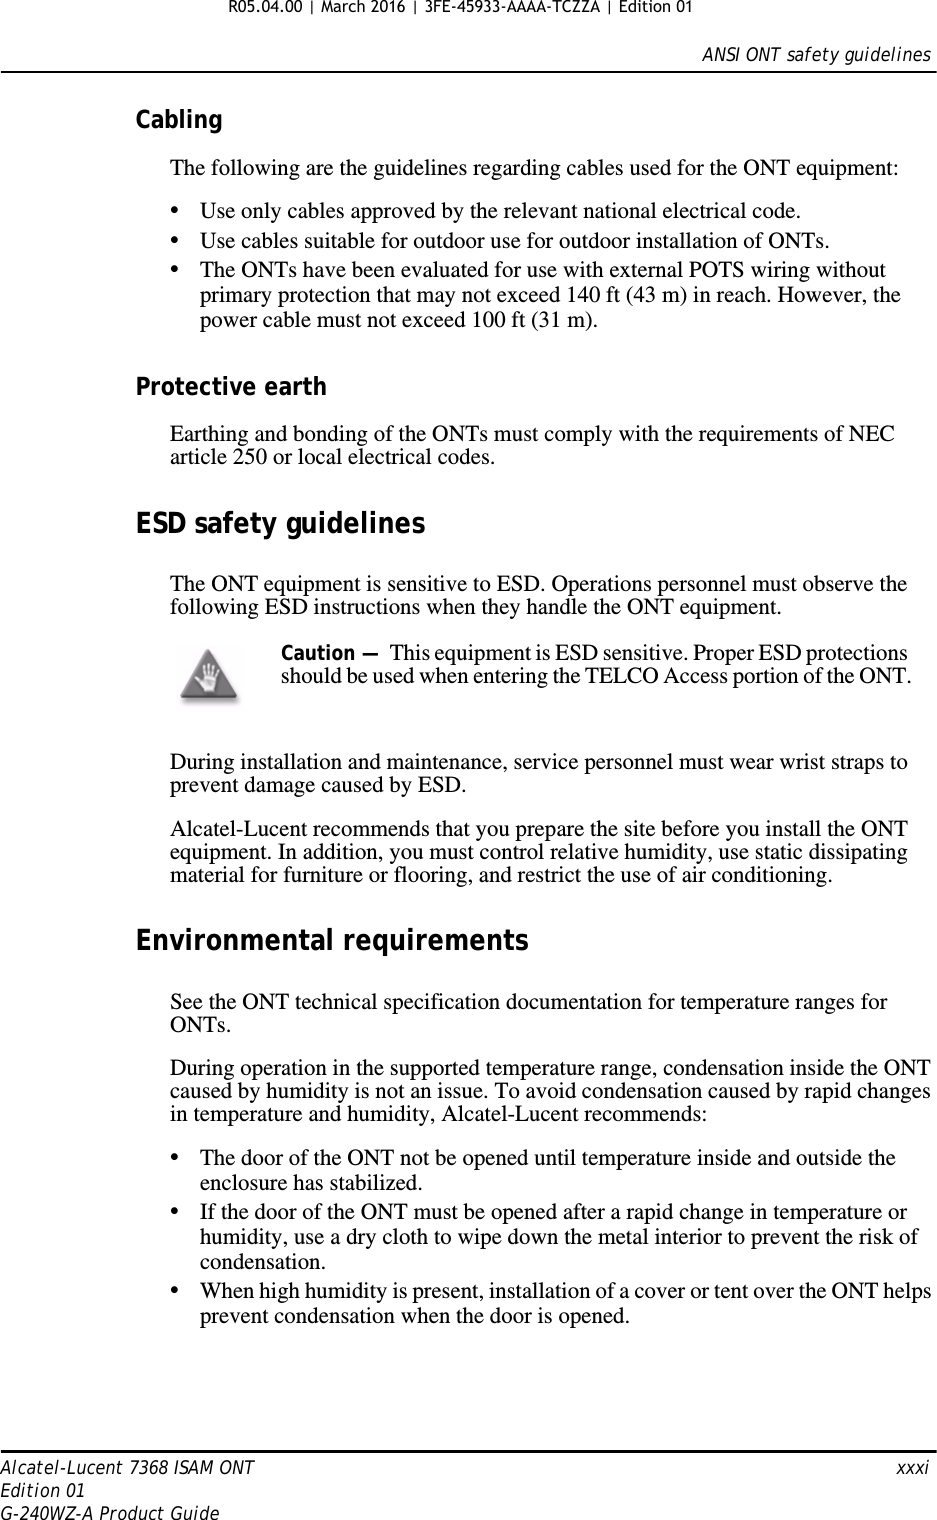 ANSI ONT safety guidelinesAlcatel-Lucent 7368 ISAM ONT   xxxiEdition 01G-240WZ-A Product GuideCablingThe following are the guidelines regarding cables used for the ONT equipment:•Use only cables approved by the relevant national electrical code.•Use cables suitable for outdoor use for outdoor installation of ONTs.•The ONTs have been evaluated for use with external POTS wiring without primary protection that may not exceed 140 ft (43 m) in reach. However, the power cable must not exceed 100 ft (31 m).Protective earthEarthing and bonding of the ONTs must comply with the requirements of NEC article 250 or local electrical codes.ESD safety guidelinesThe ONT equipment is sensitive to ESD. Operations personnel must observe the following ESD instructions when they handle the ONT equipment. During installation and maintenance, service personnel must wear wrist straps to prevent damage caused by ESD.Alcatel-Lucent recommends that you prepare the site before you install the ONT equipment. In addition, you must control relative humidity, use static dissipating material for furniture or flooring, and restrict the use of air conditioning.Environmental requirementsSee the ONT technical specification documentation for temperature ranges for ONTs.During operation in the supported temperature range, condensation inside the ONT caused by humidity is not an issue. To avoid condensation caused by rapid changes in temperature and humidity, Alcatel-Lucent recommends:•The door of the ONT not be opened until temperature inside and outside the enclosure has stabilized.•If the door of the ONT must be opened after a rapid change in temperature or humidity, use a dry cloth to wipe down the metal interior to prevent the risk of condensation.•When high humidity is present, installation of a cover or tent over the ONT helps prevent condensation when the door is opened.Caution —  This equipment is ESD sensitive. Proper ESD protections should be used when entering the TELCO Access portion of the ONT.R05.04.00 | March 2016 | 3FE-45933-AAAA-TCZZA | Edition 01 